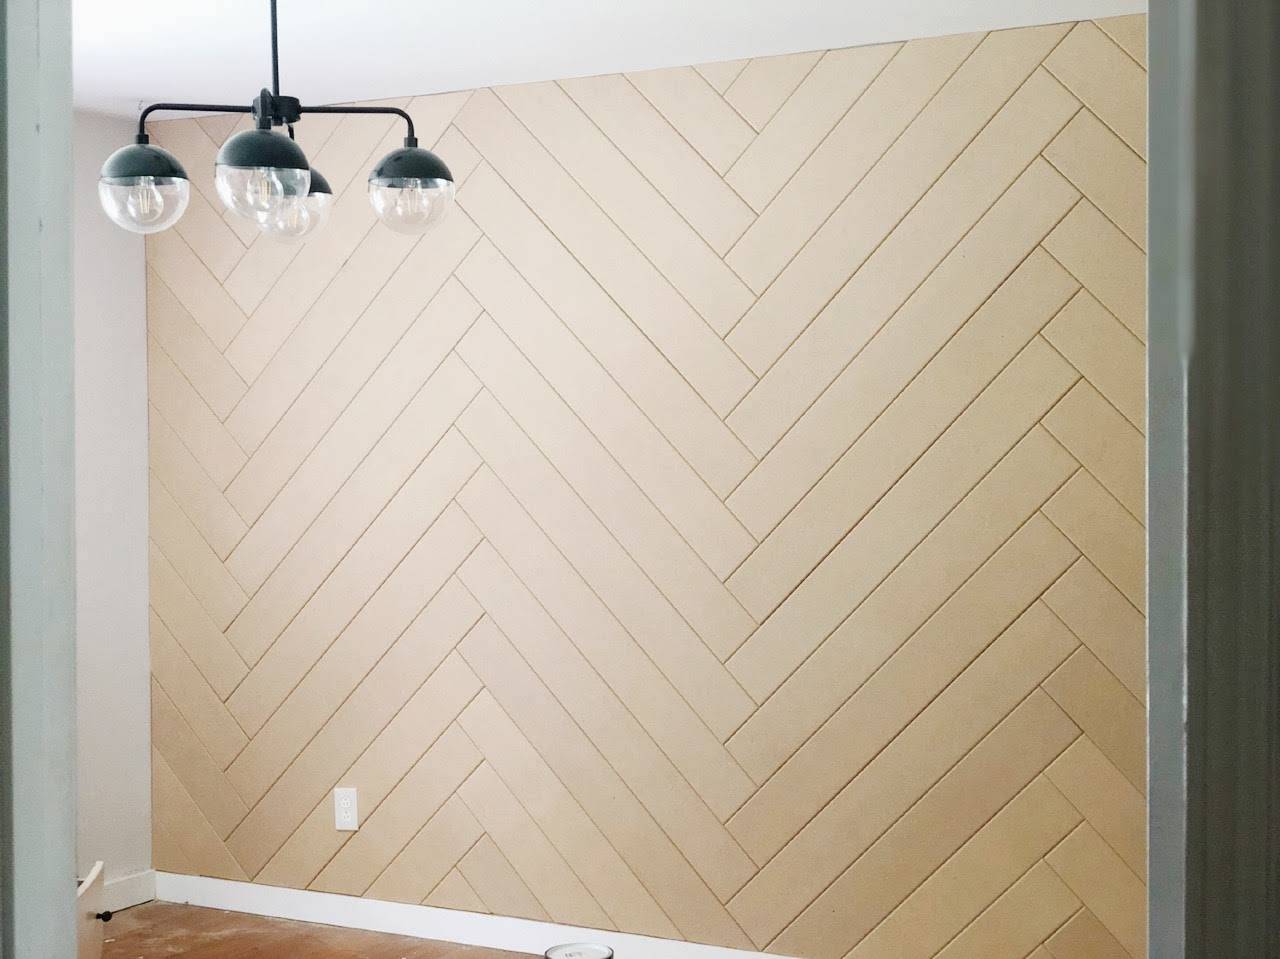 Chevron wood accent wall and a unique light fixture.